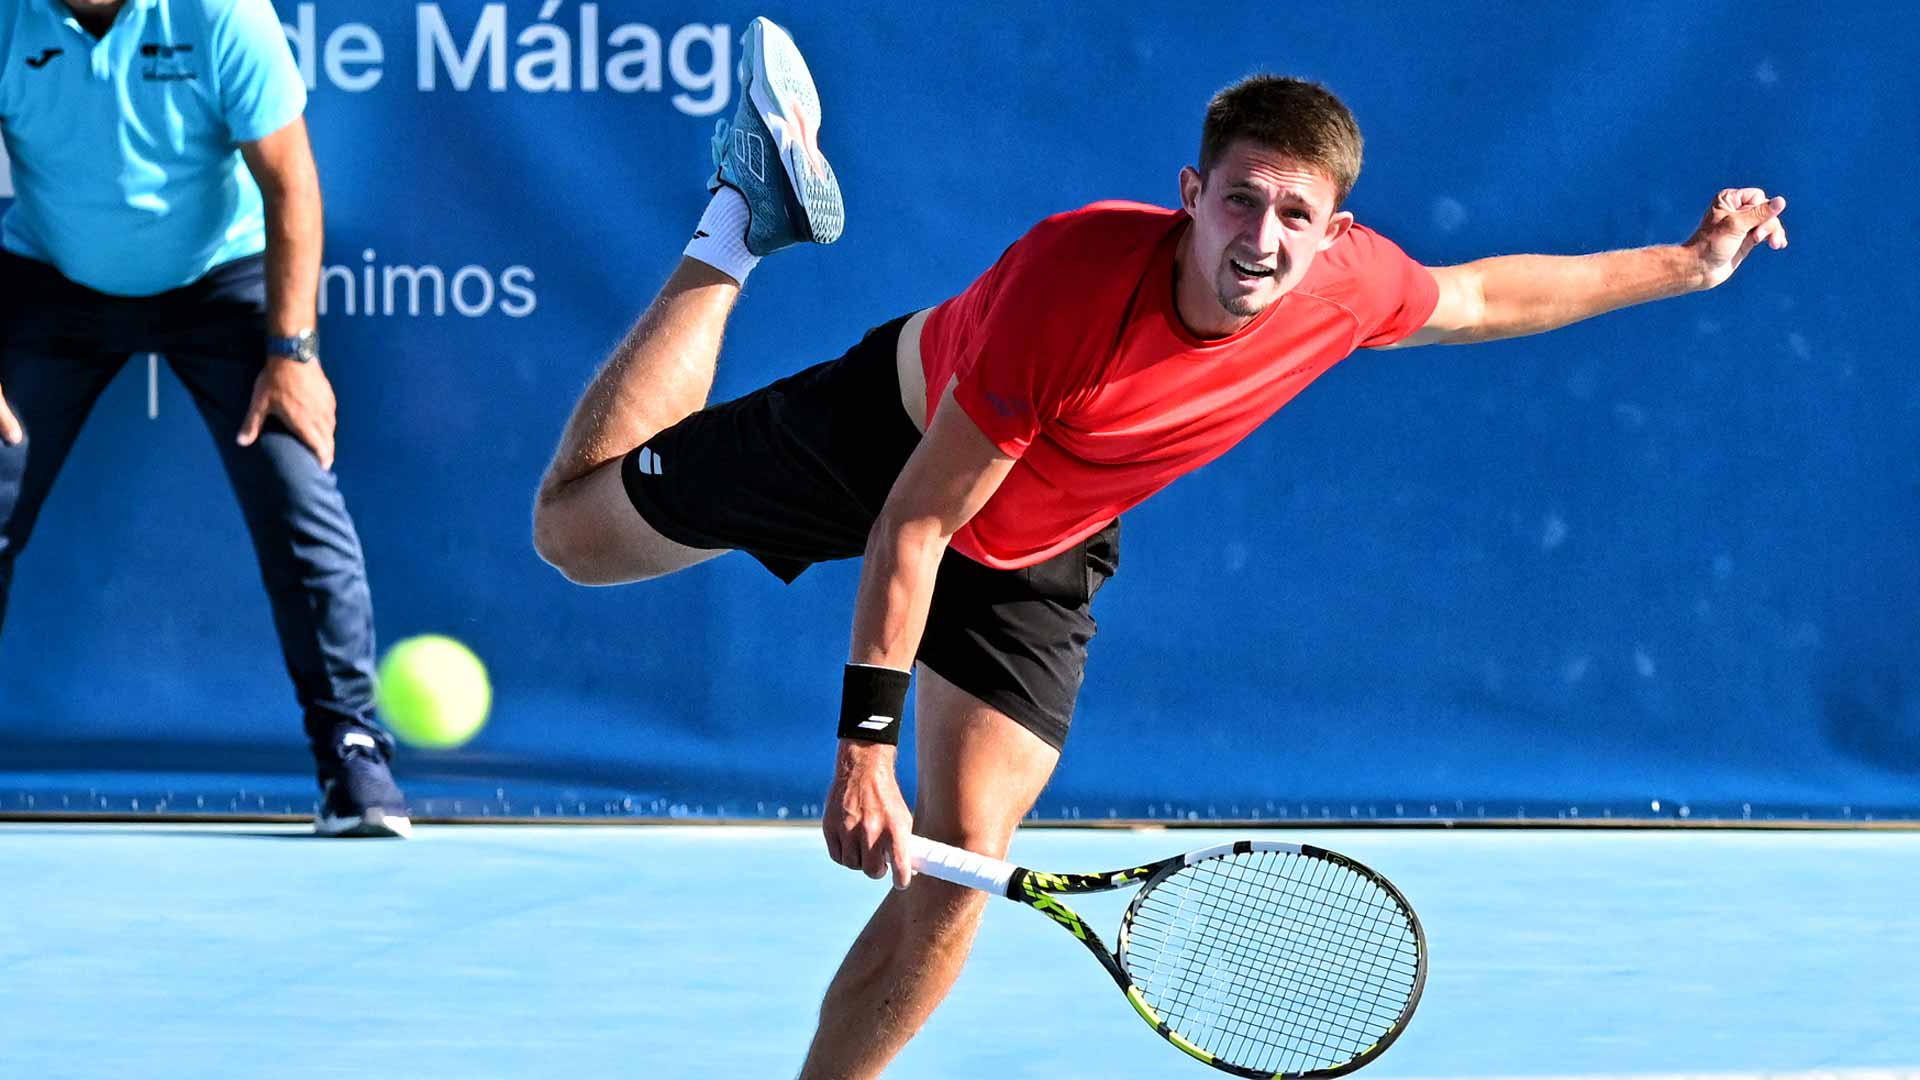 Ugo Blanchet wins the Challenger 125 event in Malaga, Spain.